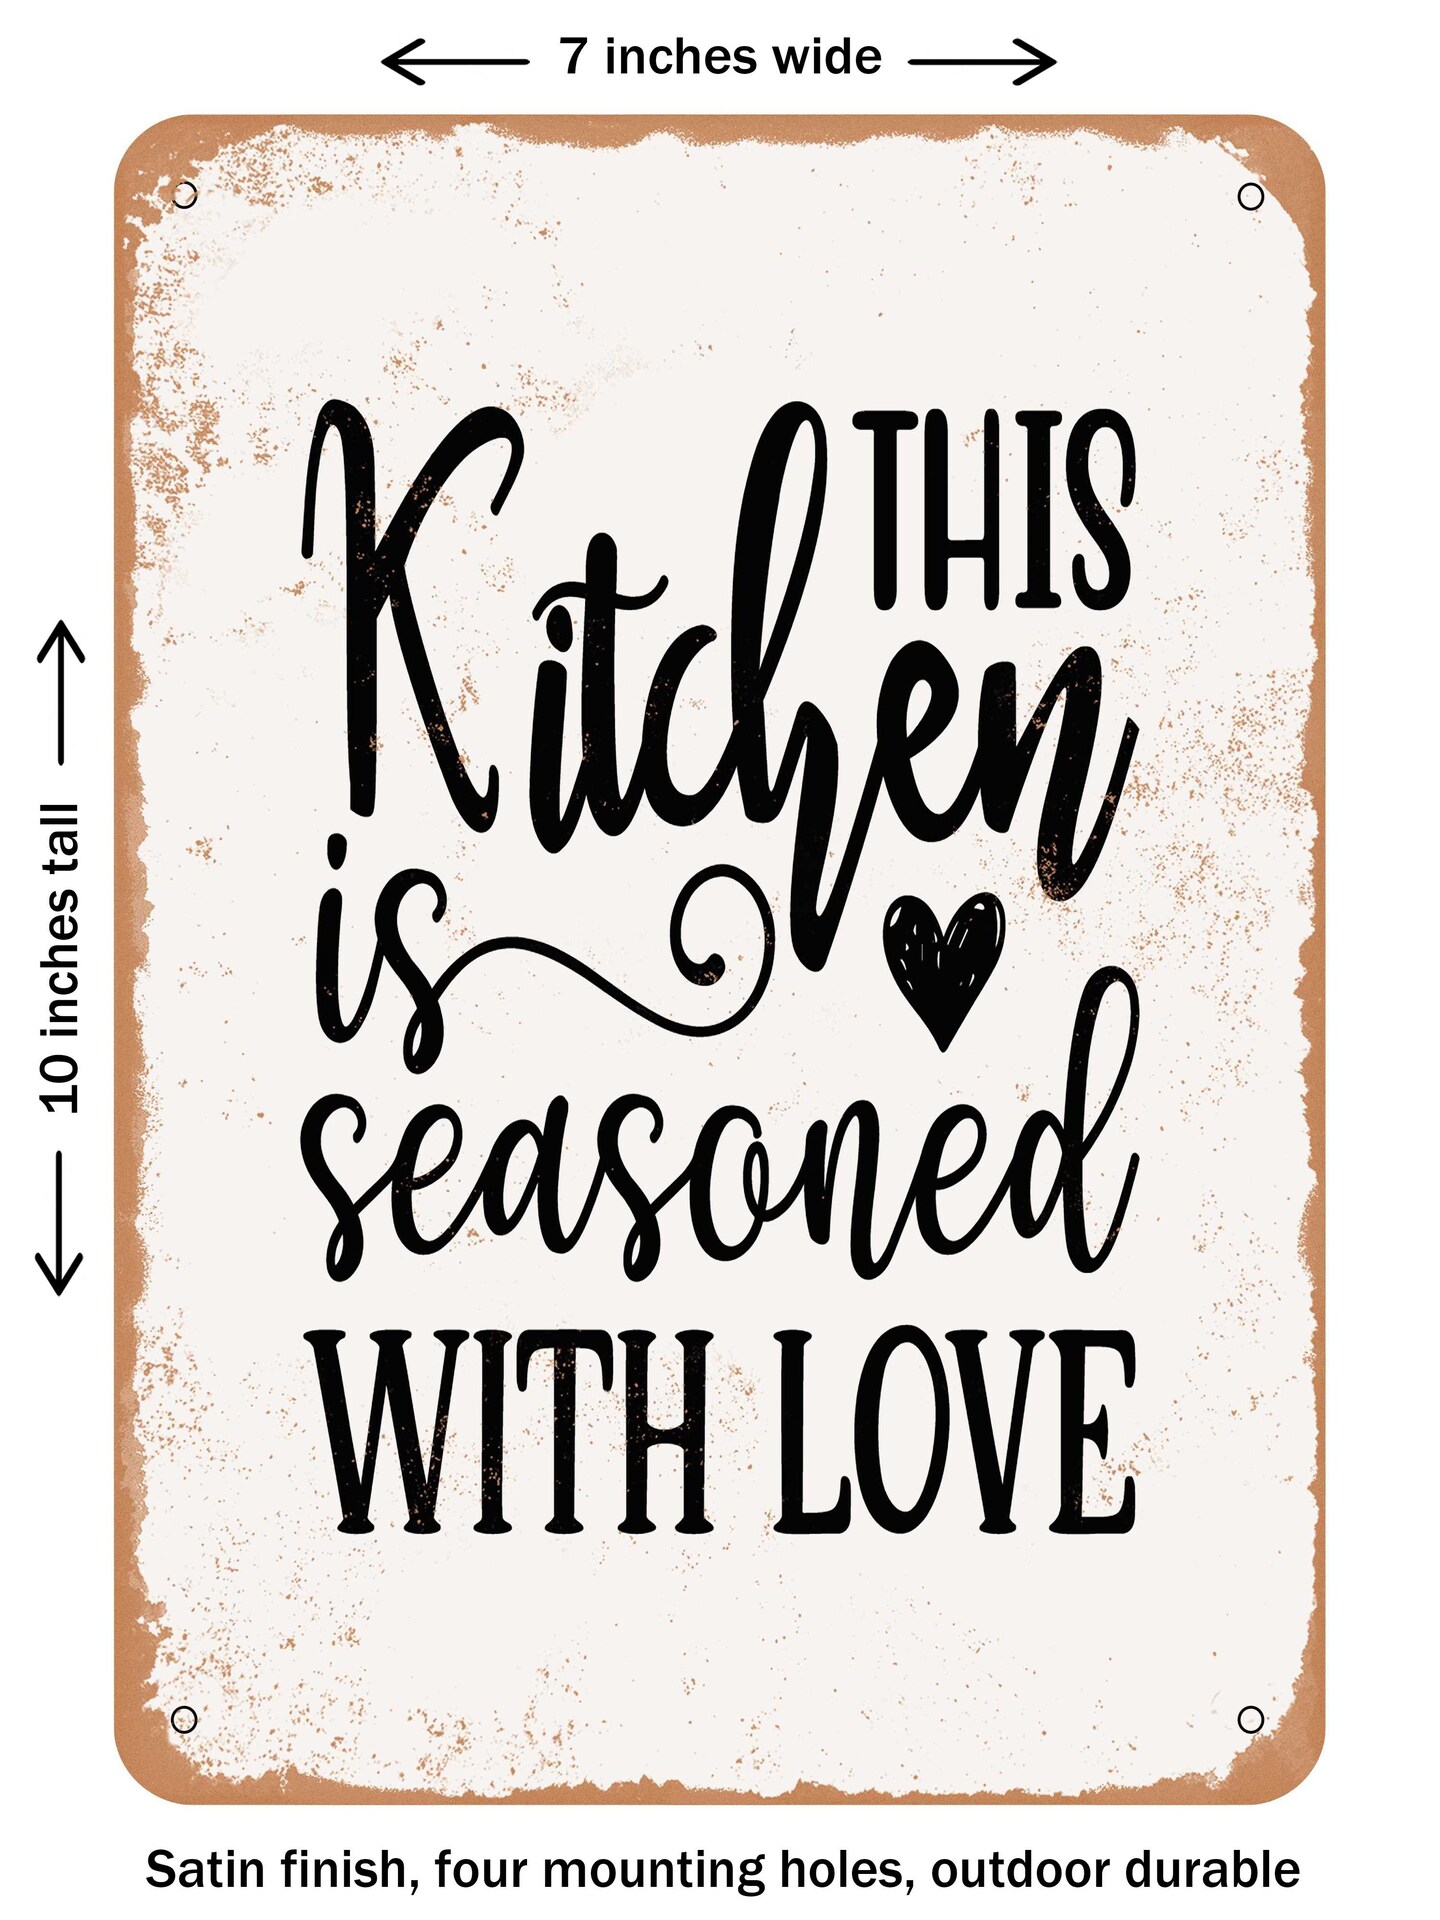 DECORATIVE METAL SIGN - This Kitchen is Seasoned With Love - 2 ...